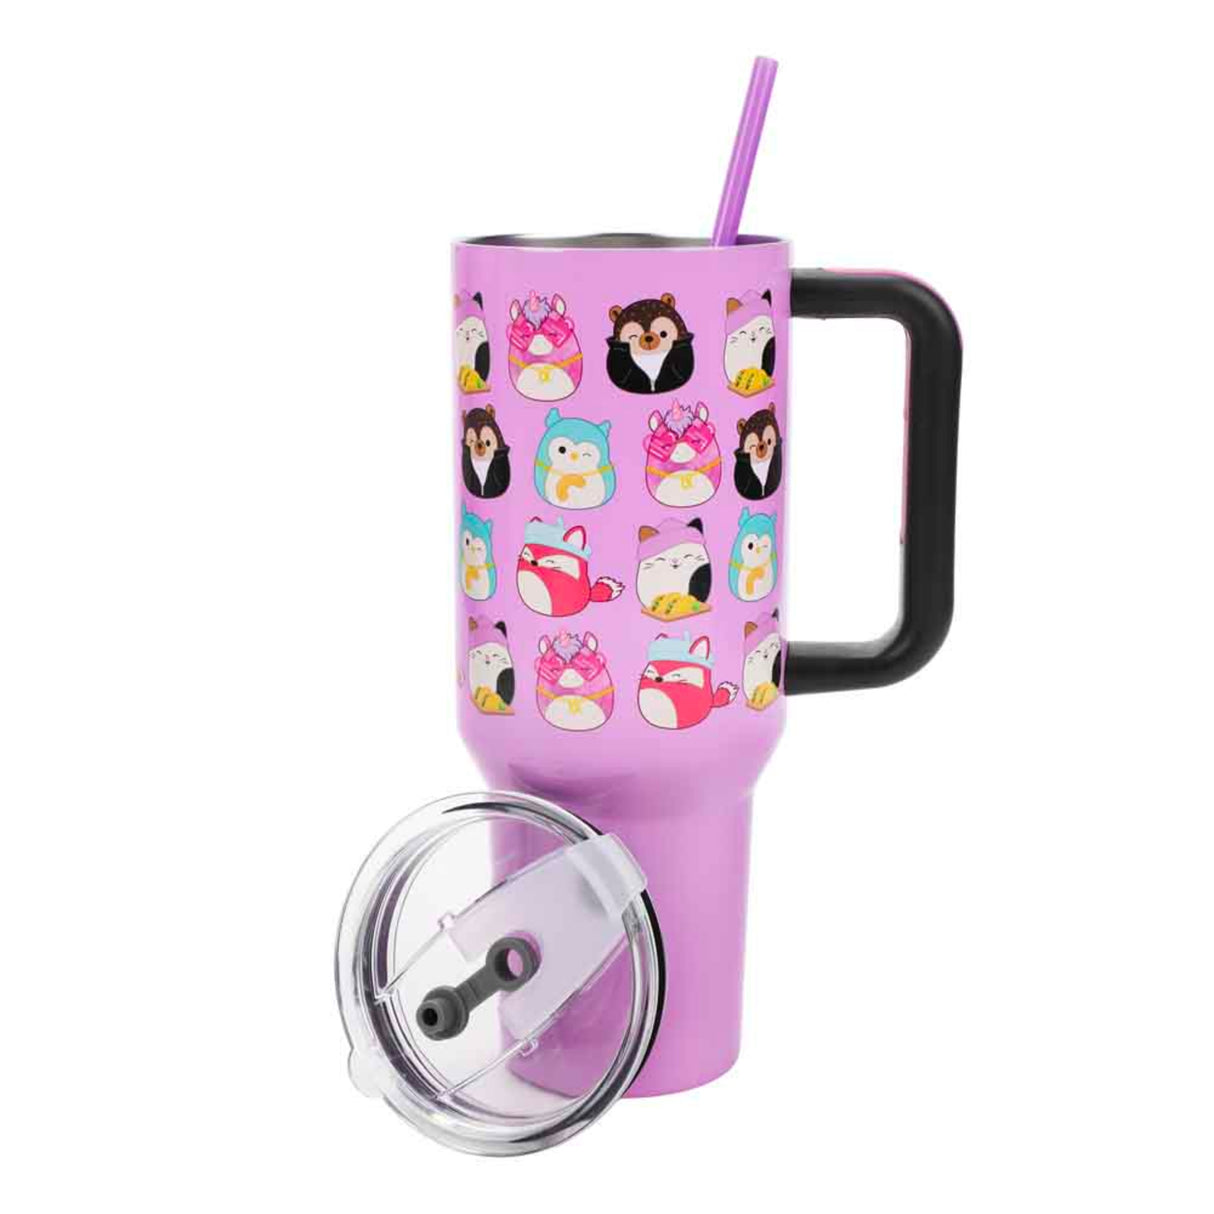 Squishmallows Characters 40 oz. Stainless Steel Tumbler